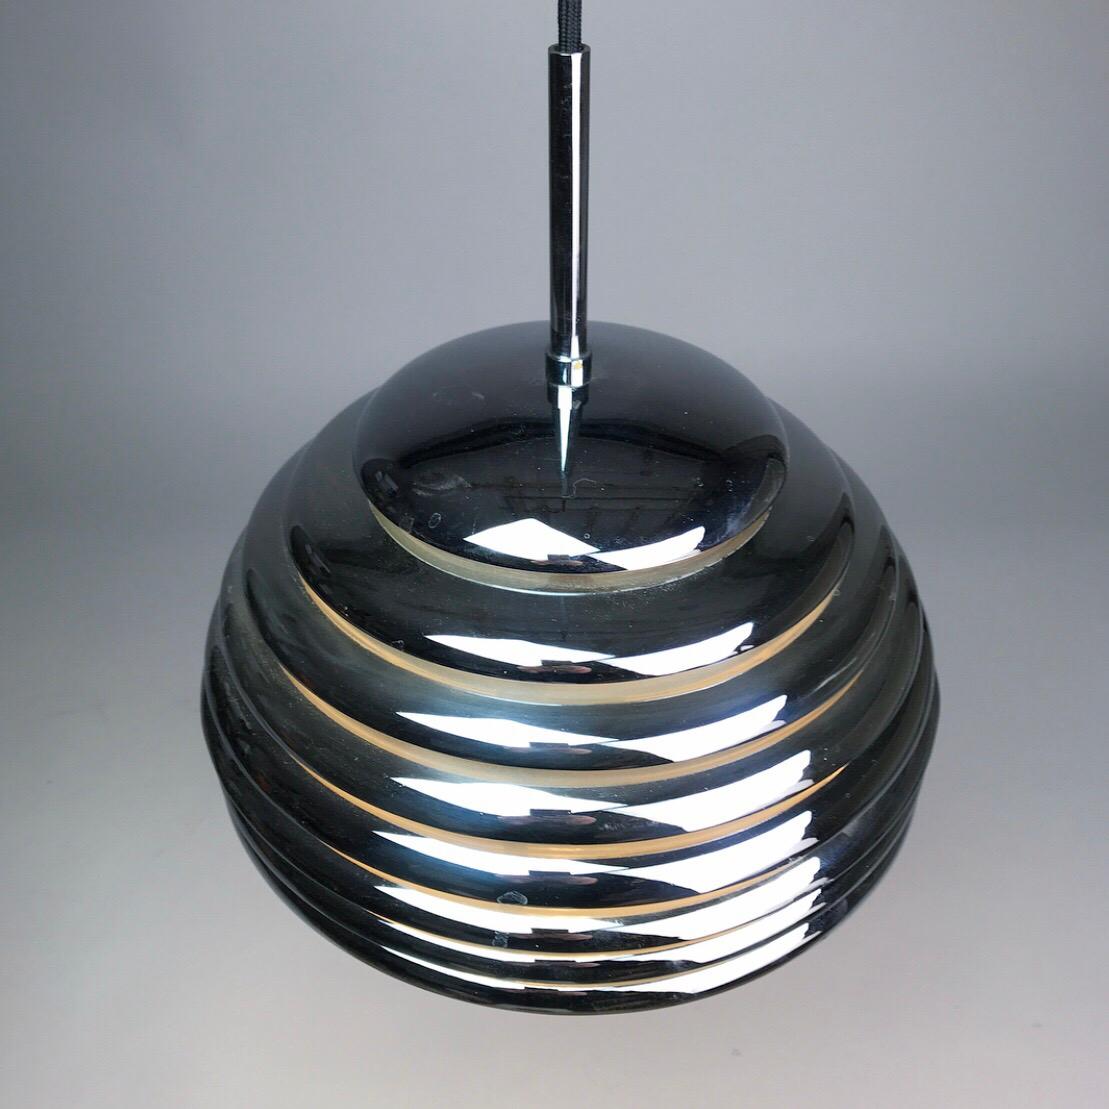 Beautiful Saturno chrome ceiling light by Kazuo Motozawa for Staff Leuchten, Germany 1970s. 

This contemporary designed ceiling light consists of eight chrome-plated rings with white lacquer to the inside. 

Stunning condition without any chips